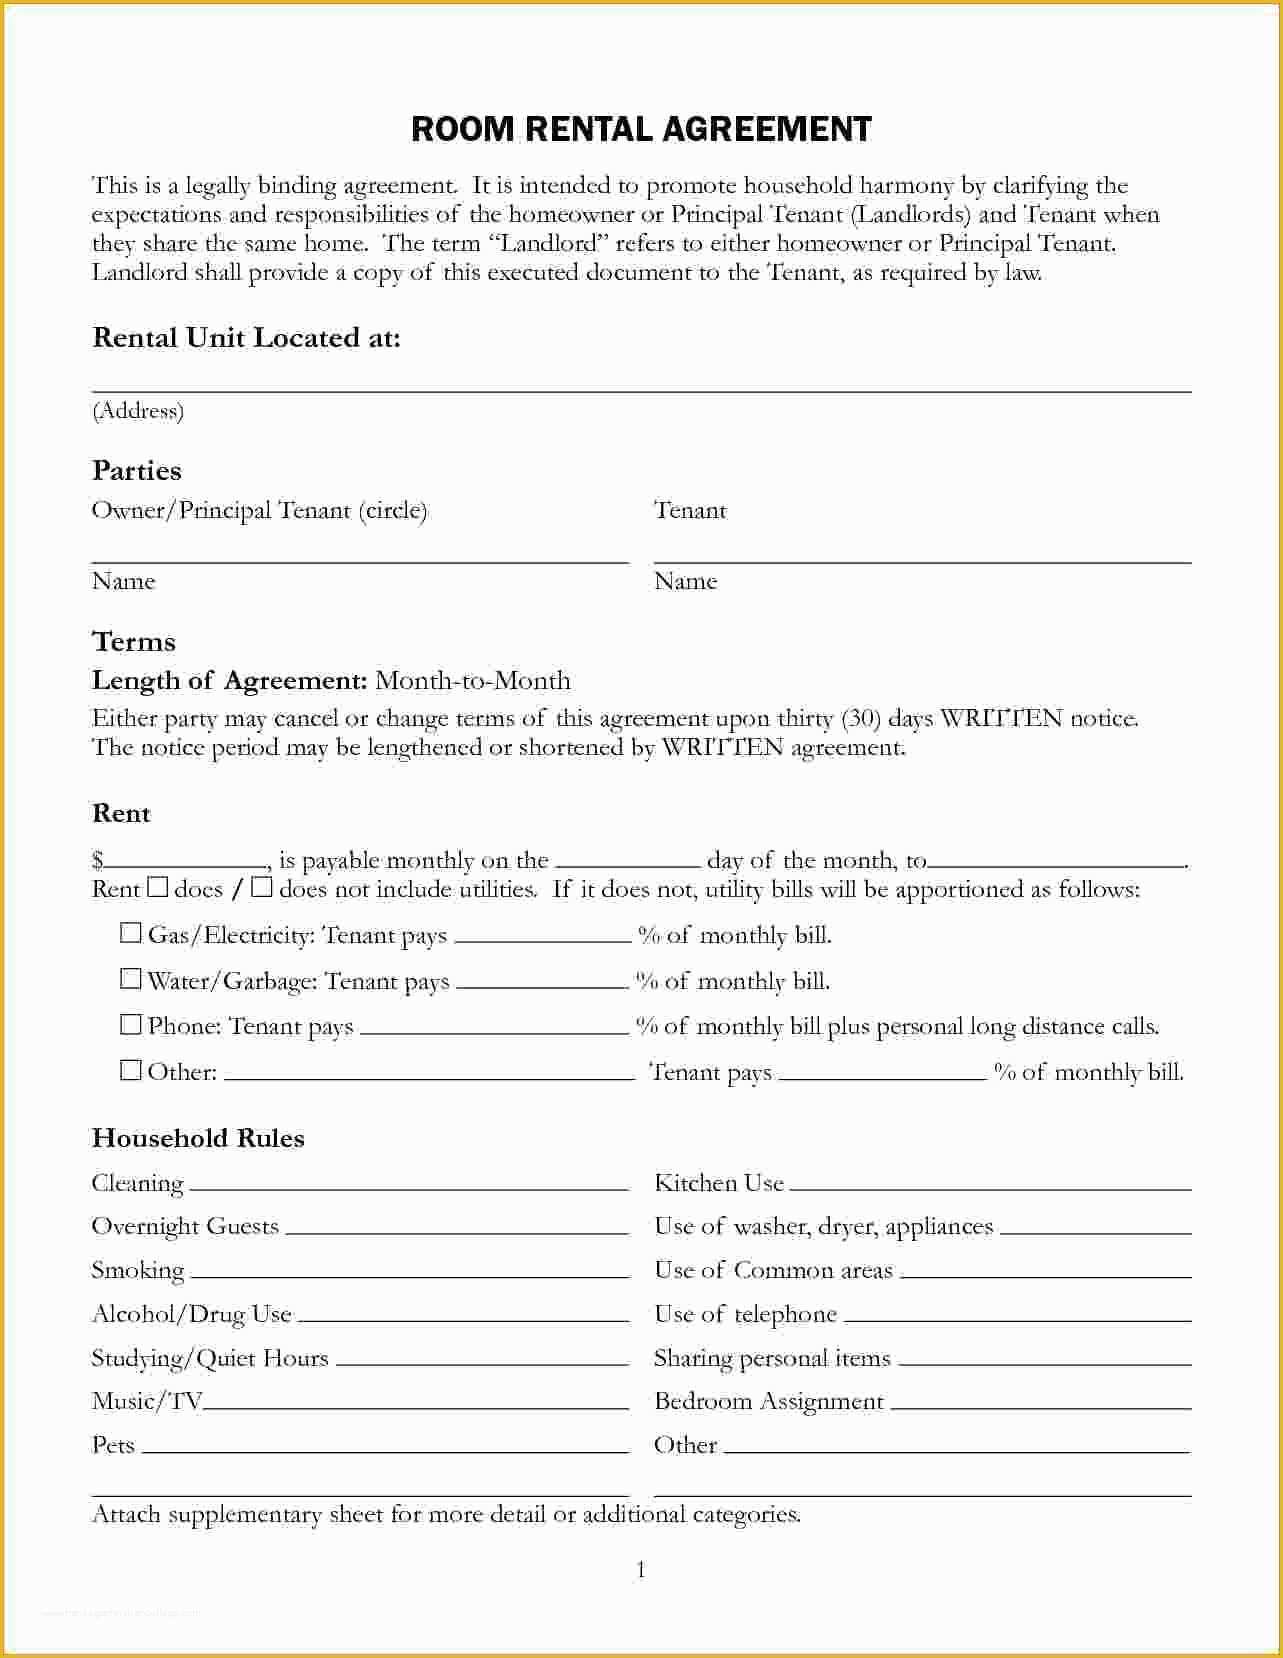 Free House Rental Agreement Template Of Home Rental Agreement 28 Images House Rental Agreement